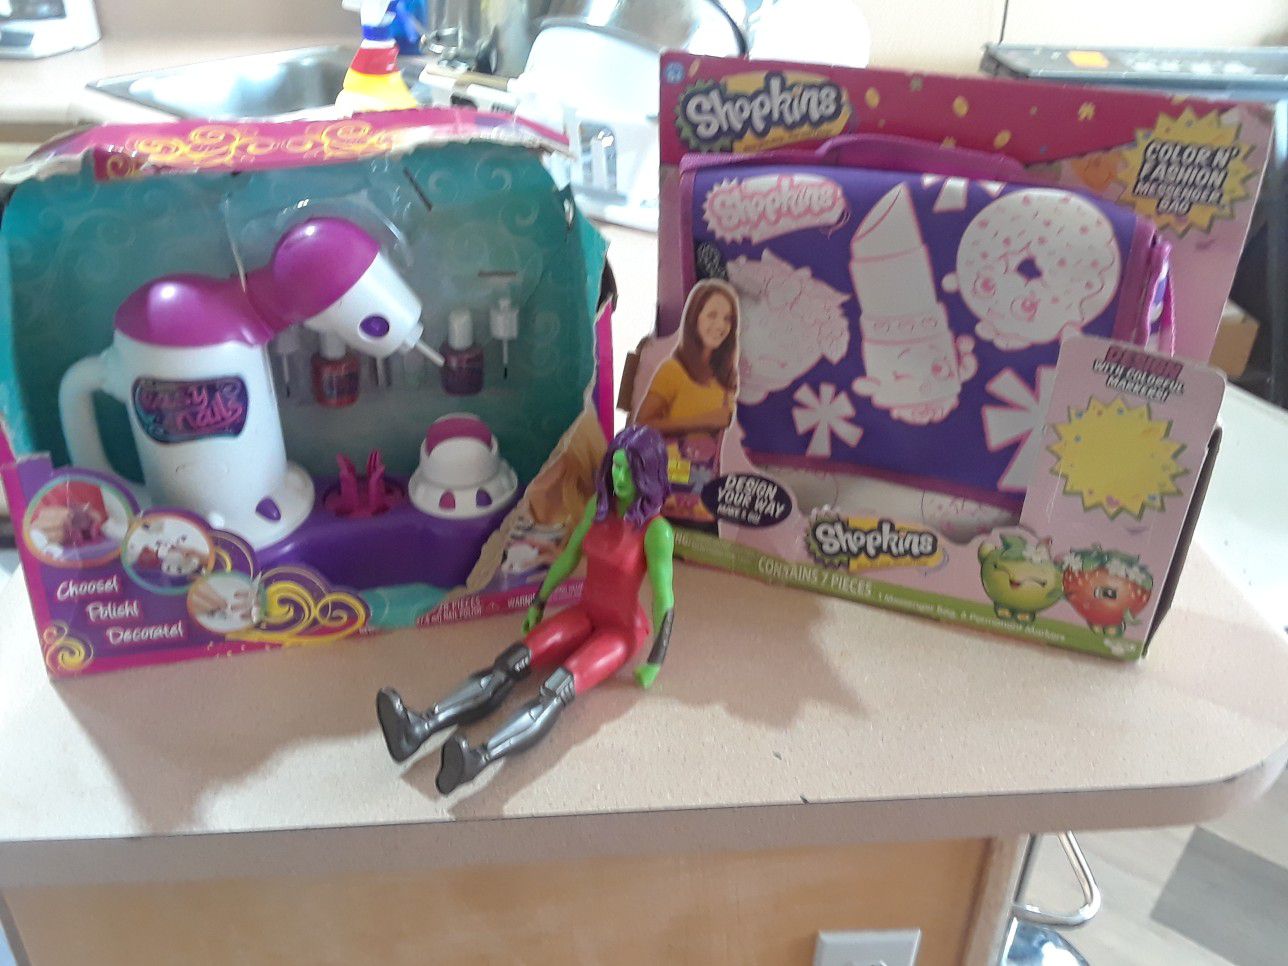 1 action figure, easy nails and shopkins decorate a bag